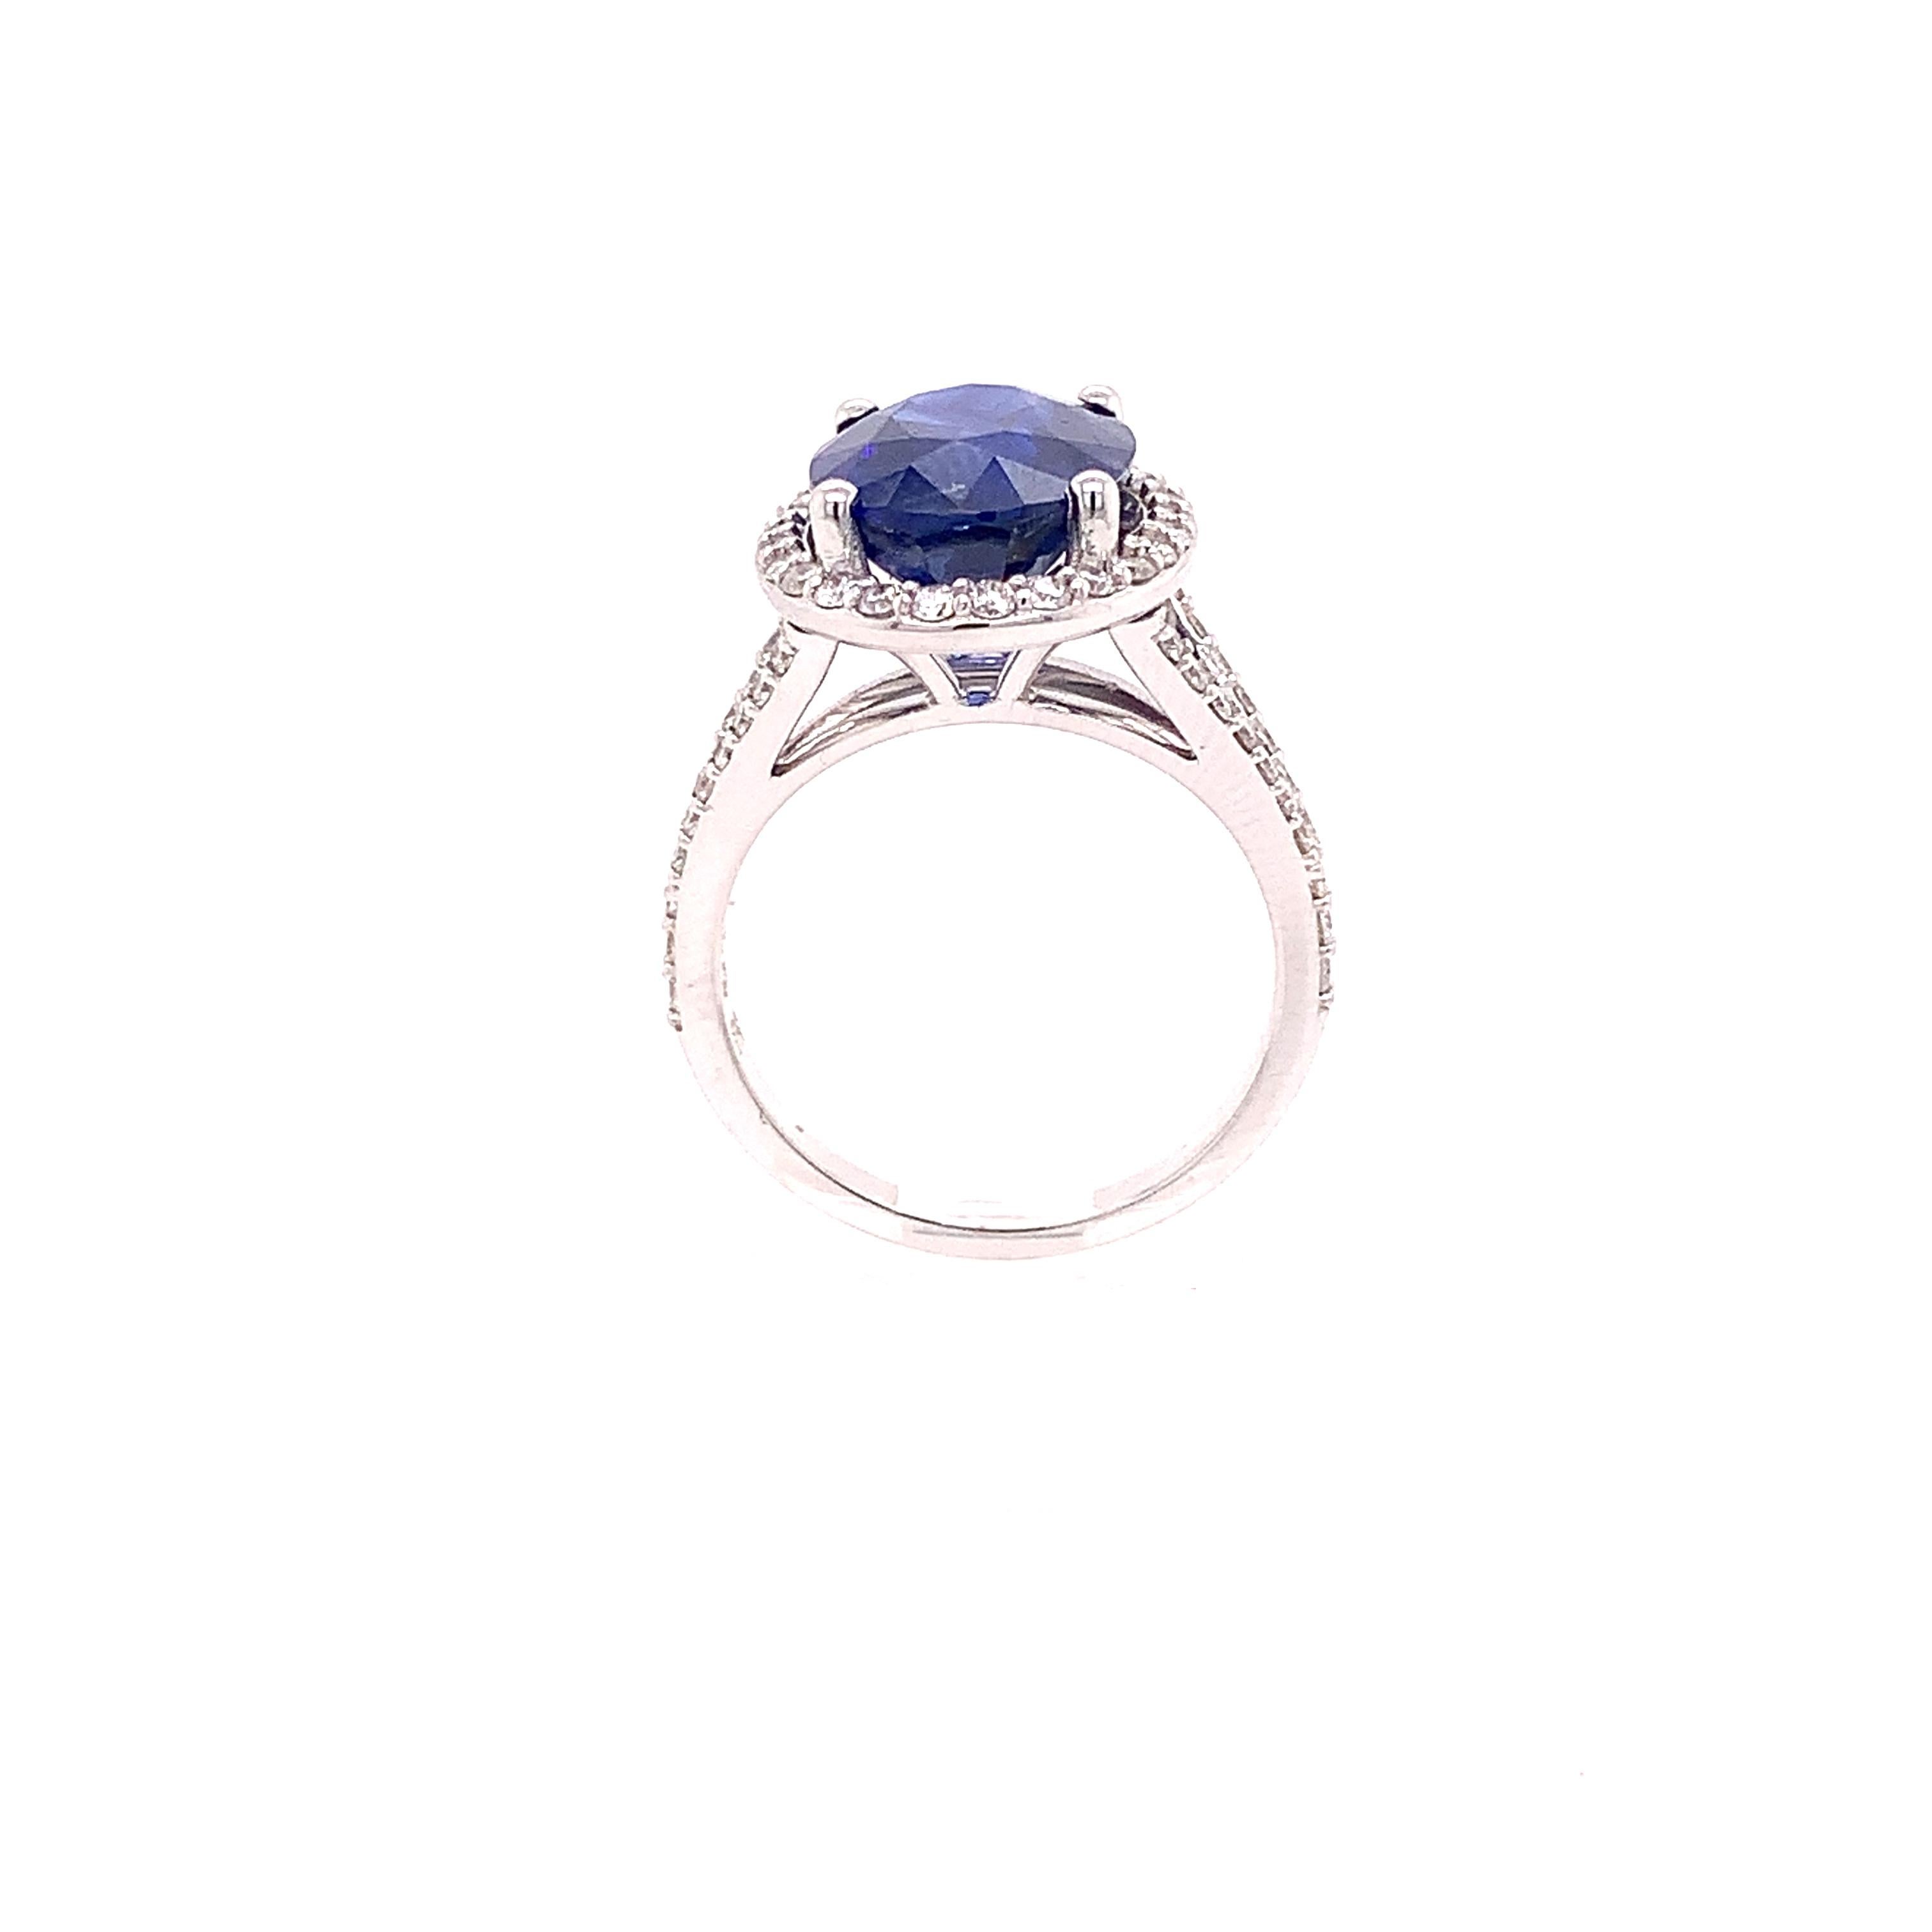 Stunning transparent oval natural blue sapphire and diamond ring crafted in 14 karat white gold with a beautiful halo and split shank.

This sapphire is GIA certified and has the original grading report. The blue sapphire is a natural heat-treated